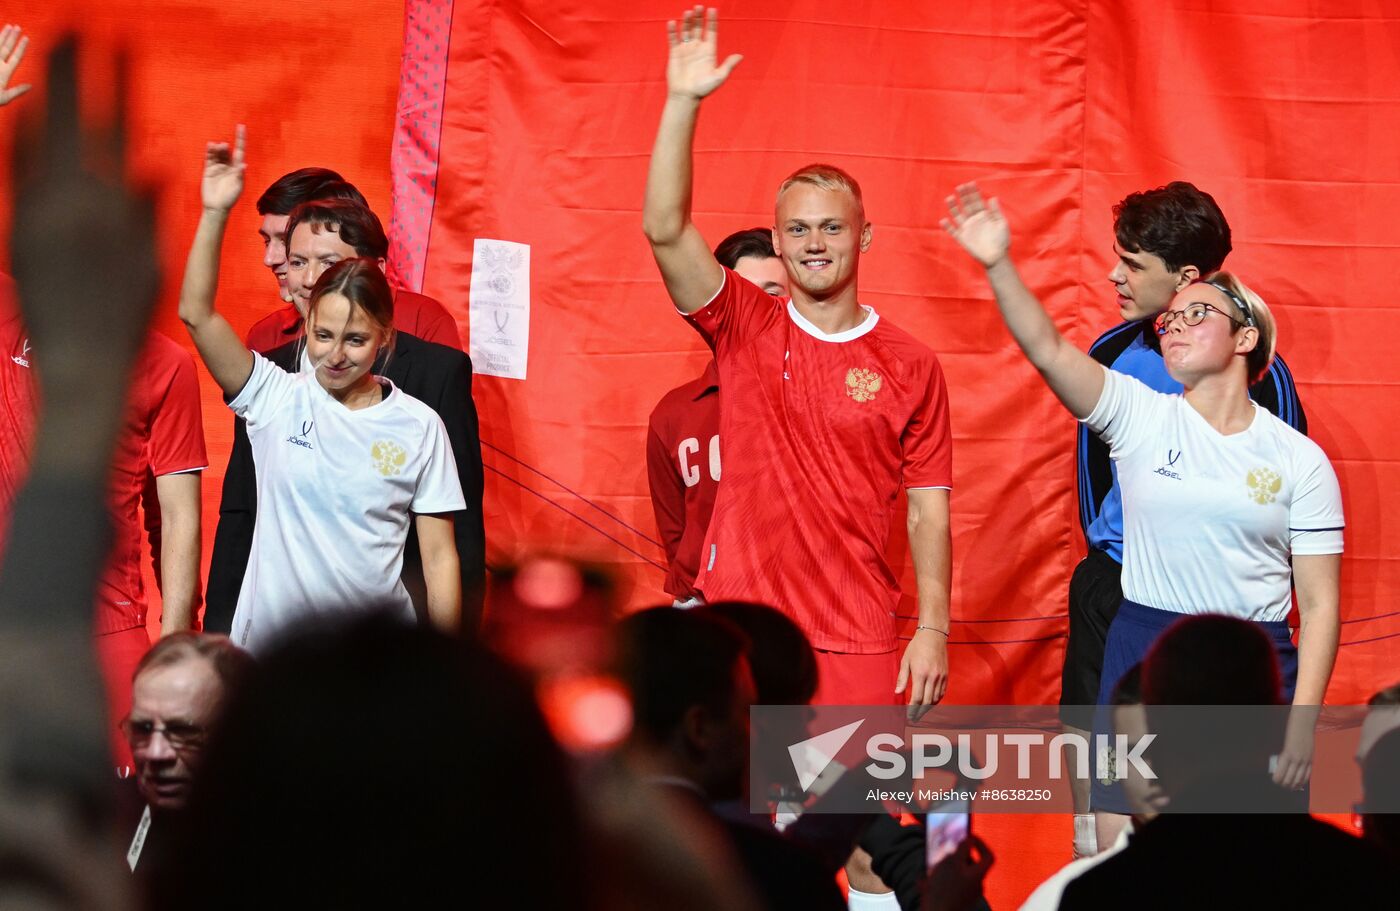 RUSSIA EXPO. Presentation of the Russian national football team's new uniform